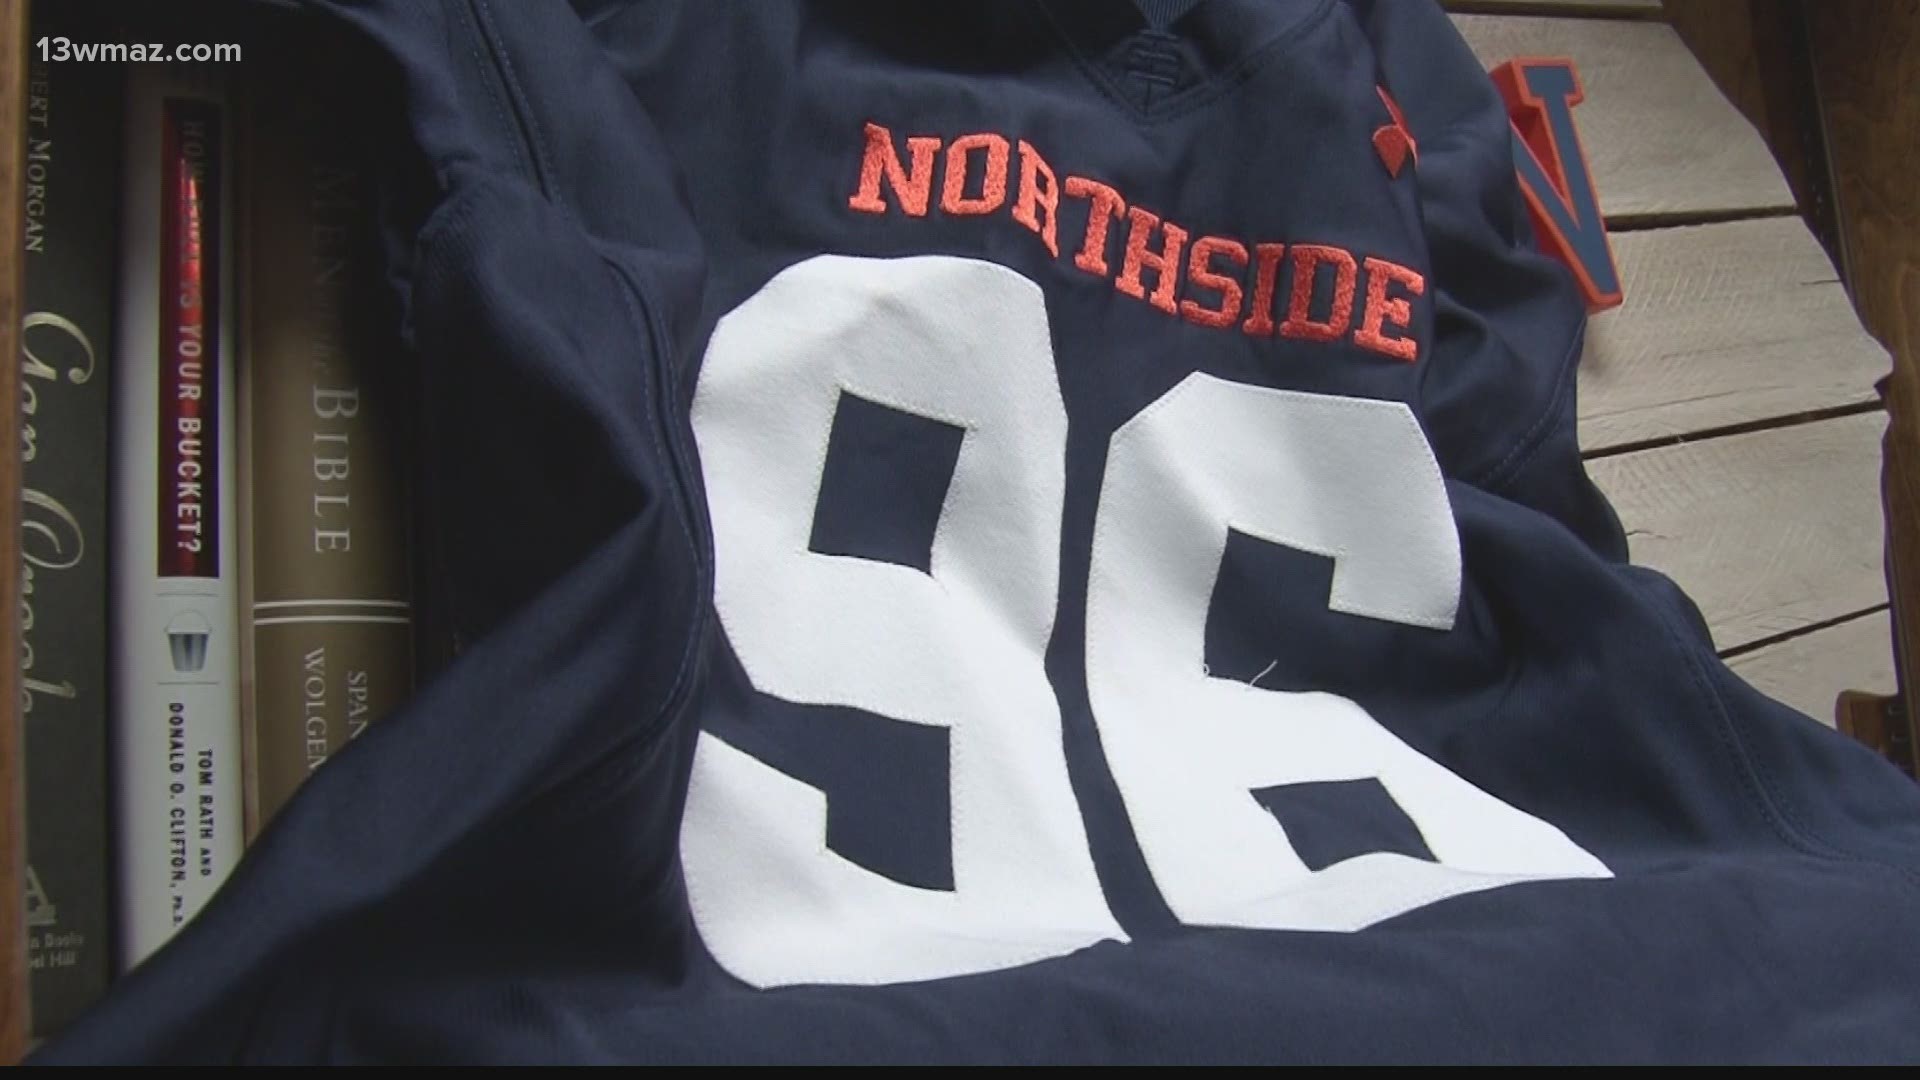 For the past 15 years, fans of the Northside Eagles couldn't spot the number 96 on the field. The jersey number was off limits with good reason.